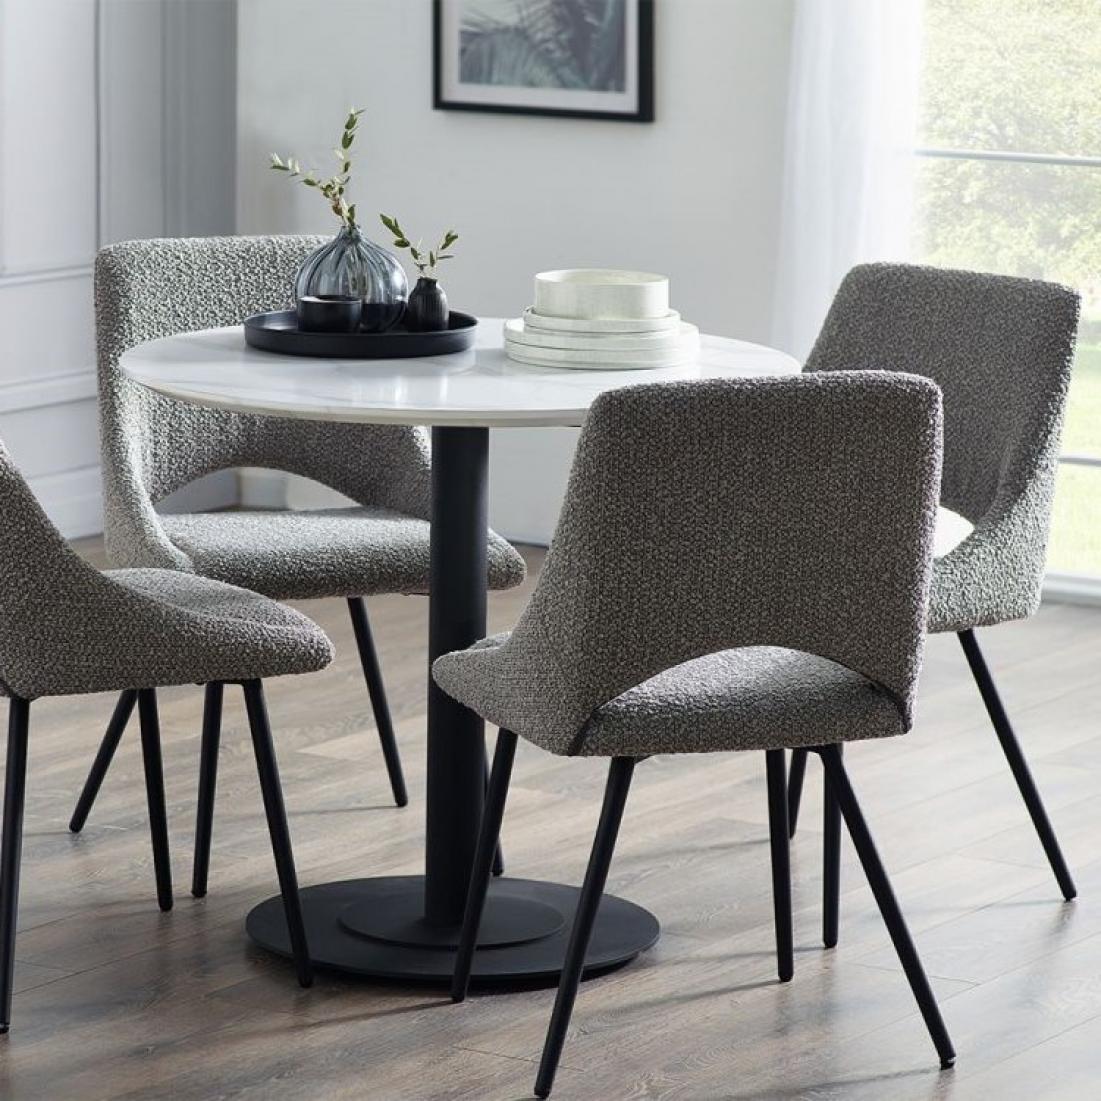 Luca Dining Table with Iris Grey Boucle Chairs